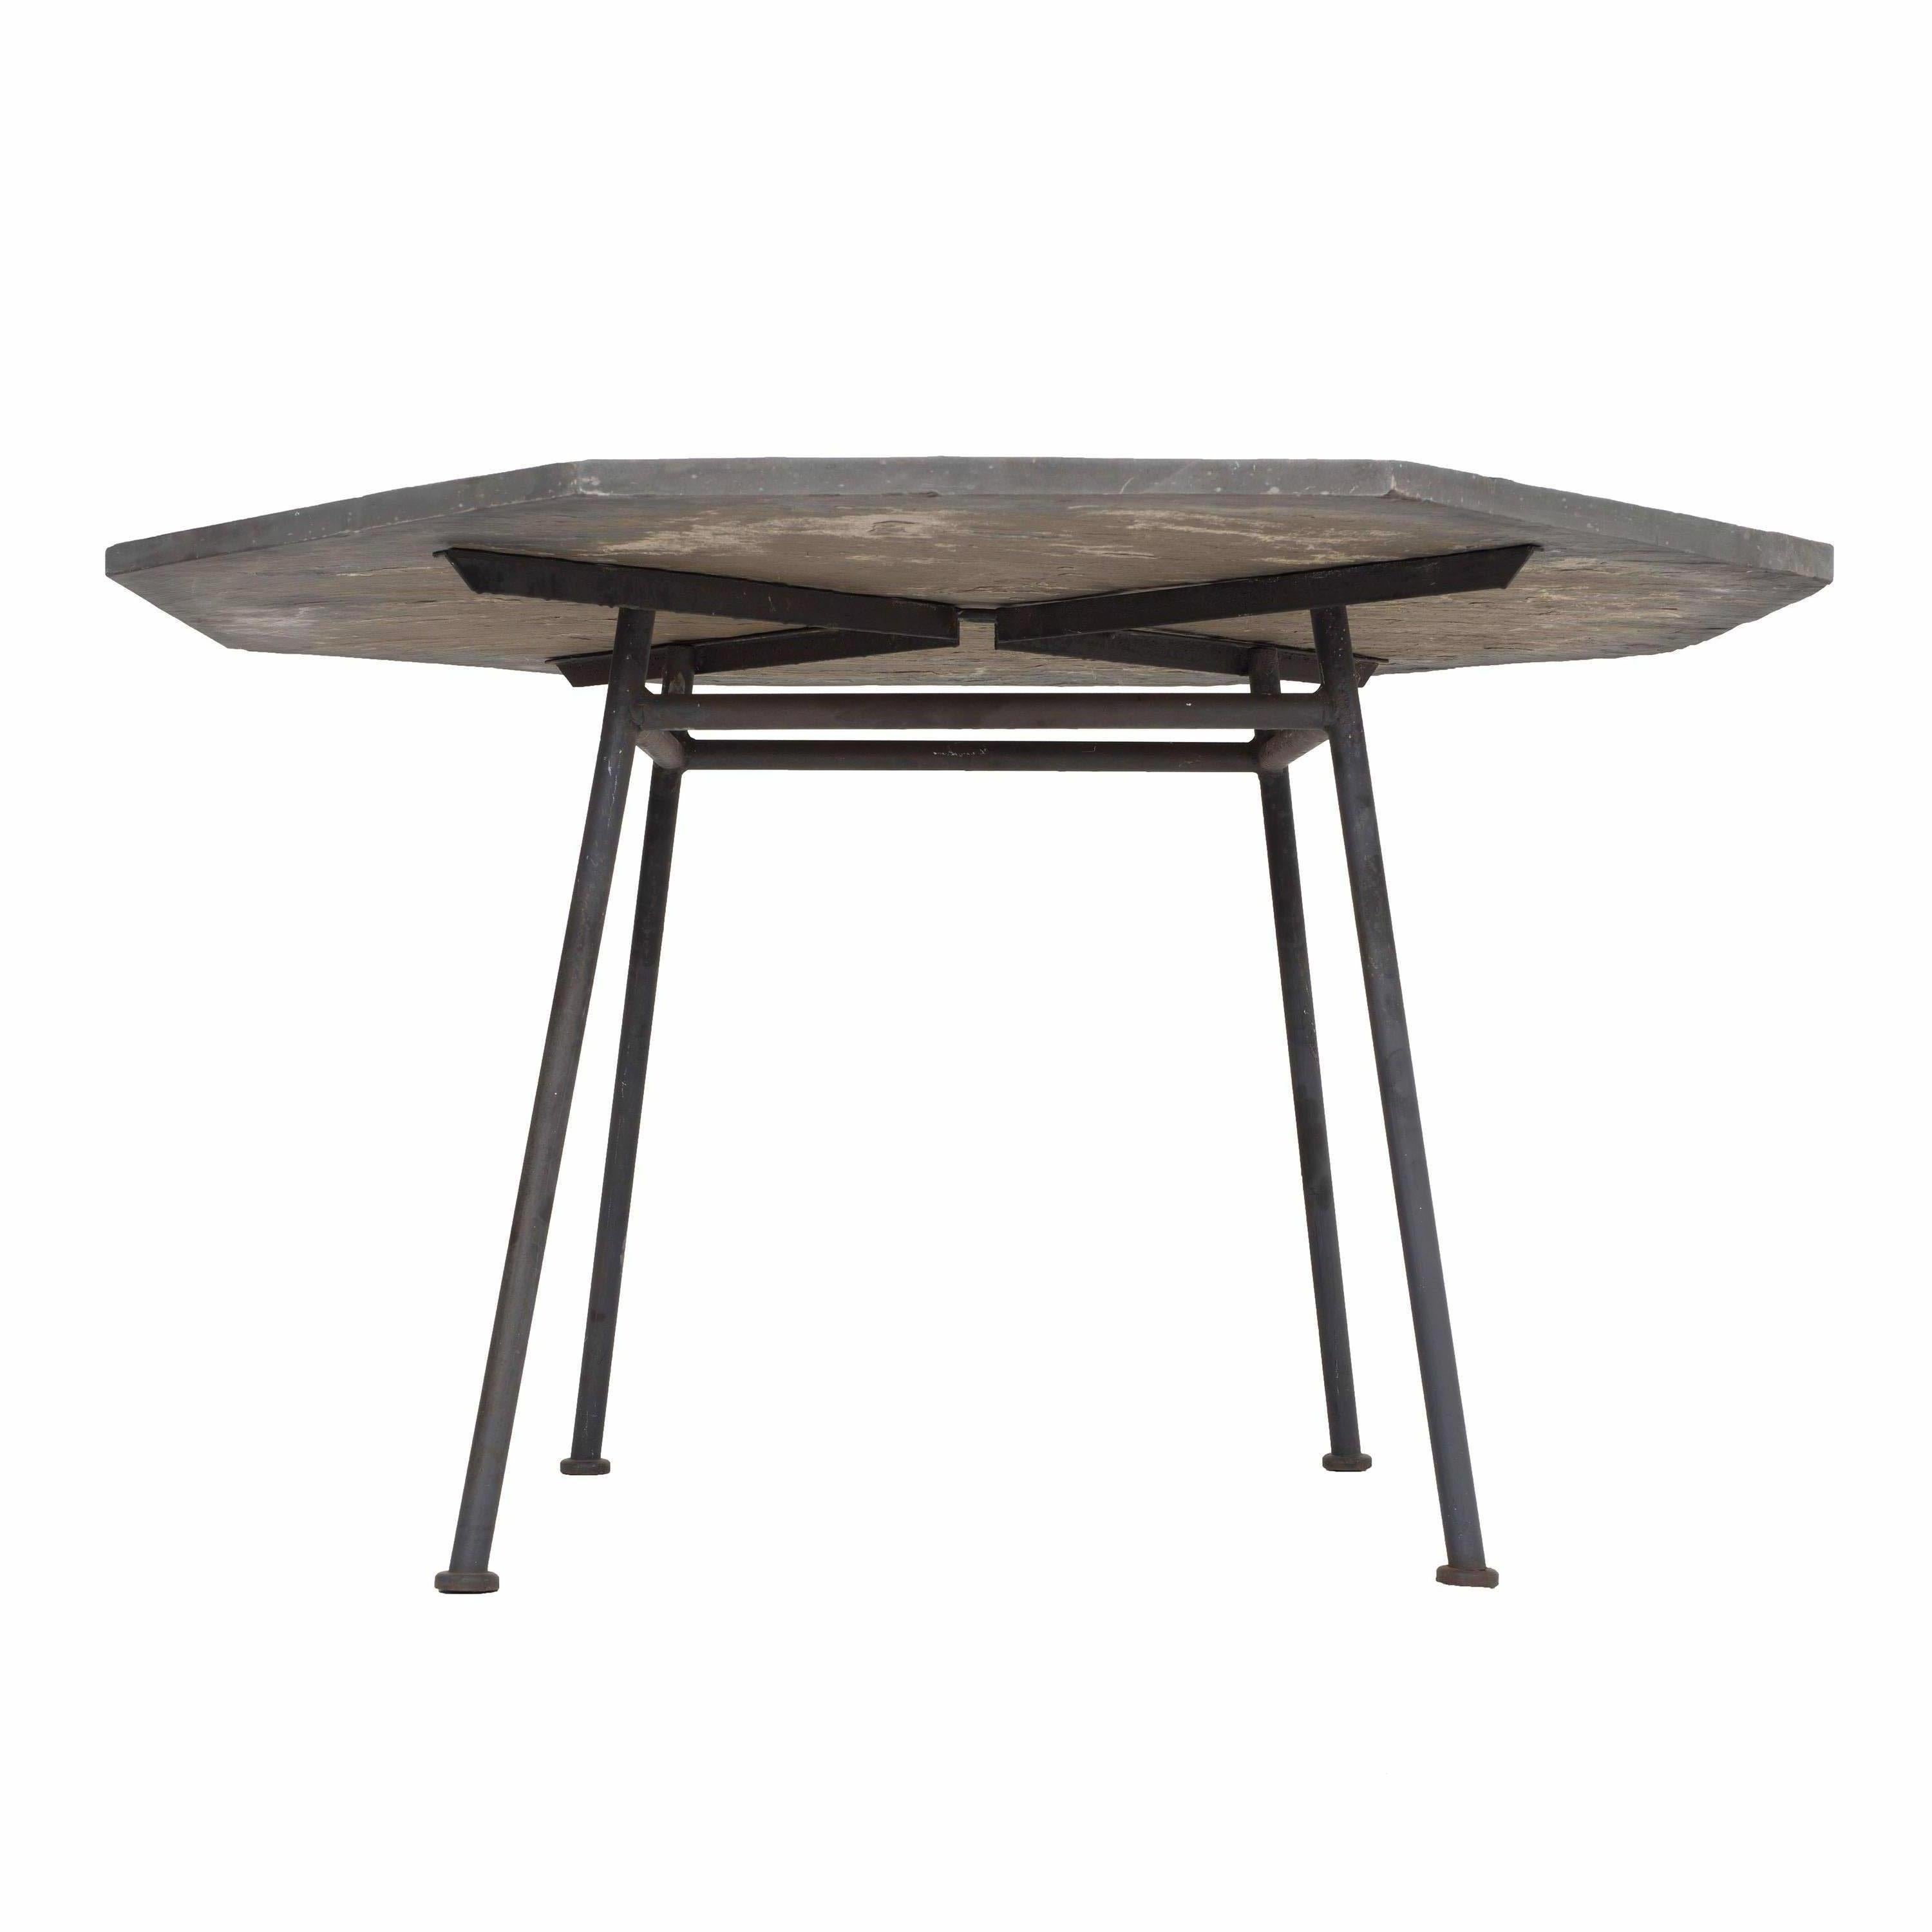 American Russell Woodard Outdoor Dining Table